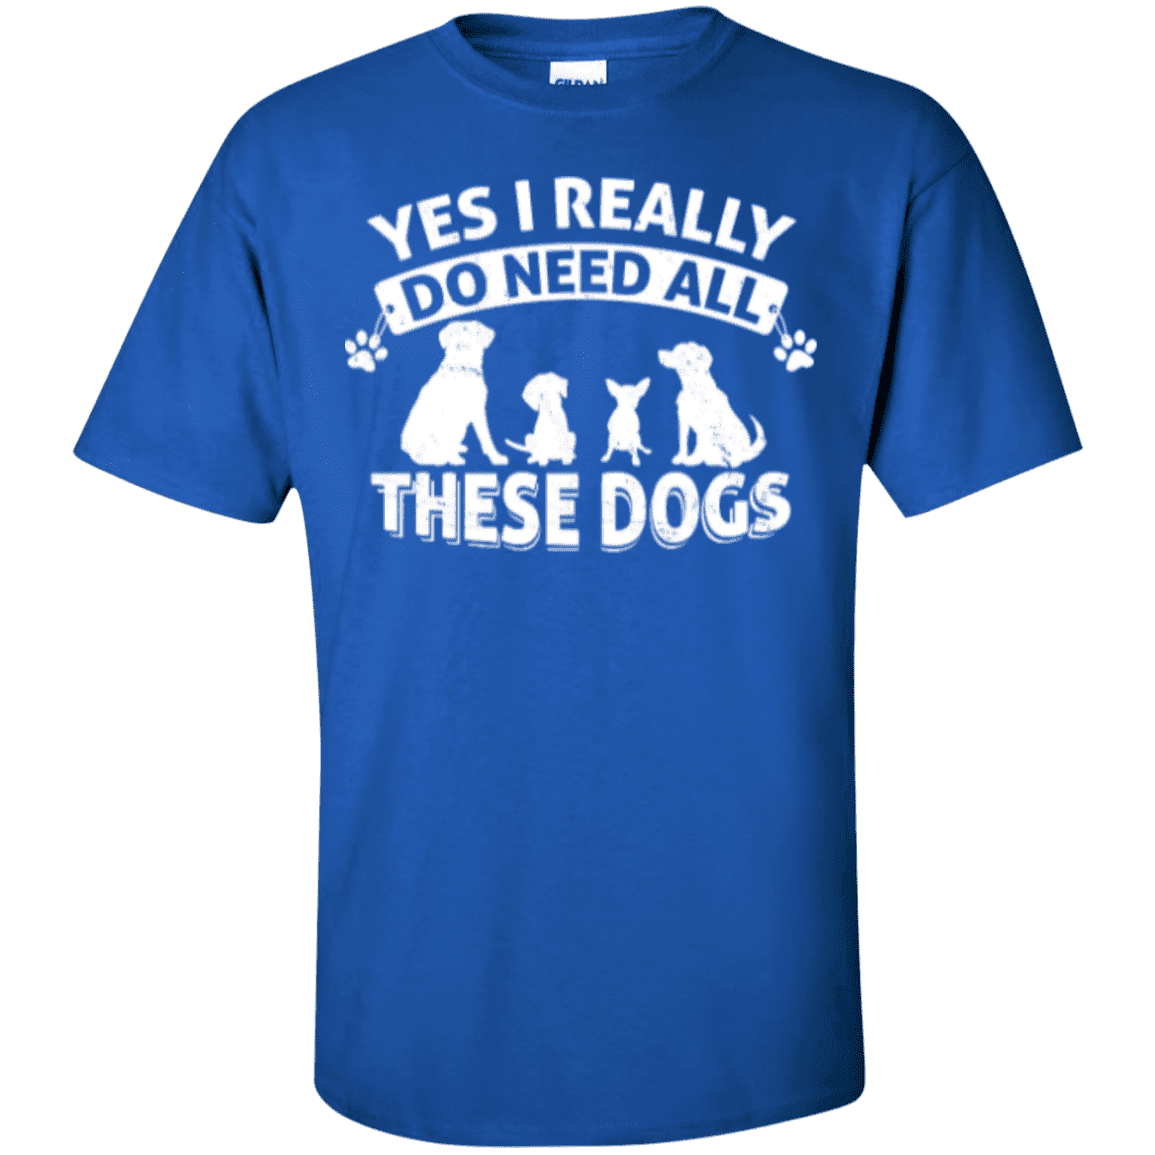 Yes I Need All These Dogs - T Shirt.